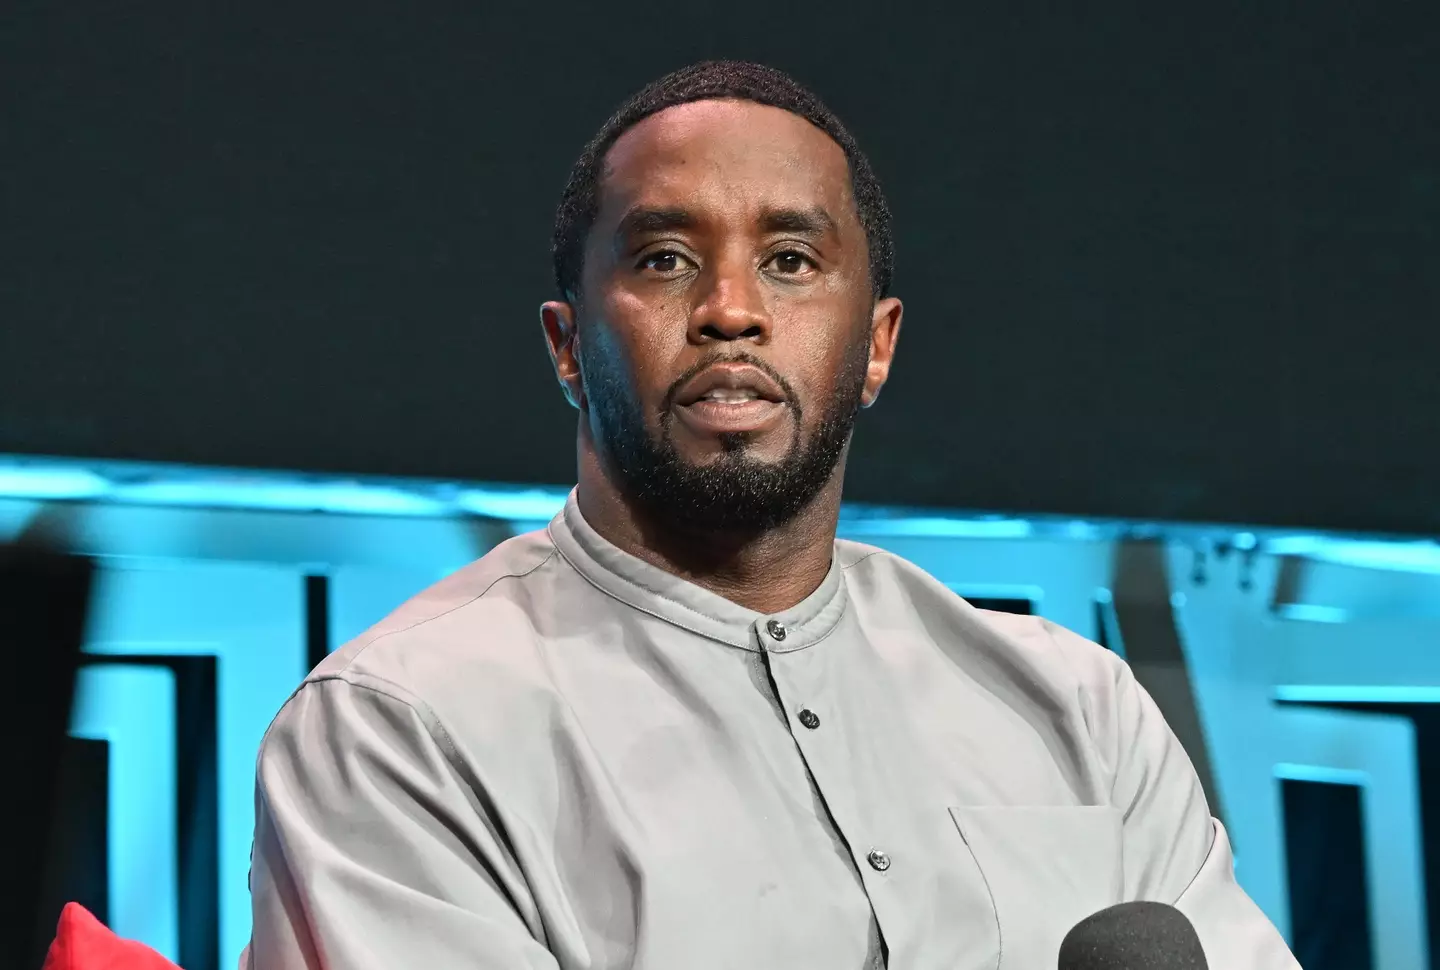 Sean 'Diddy' Combs has denied the allegations.